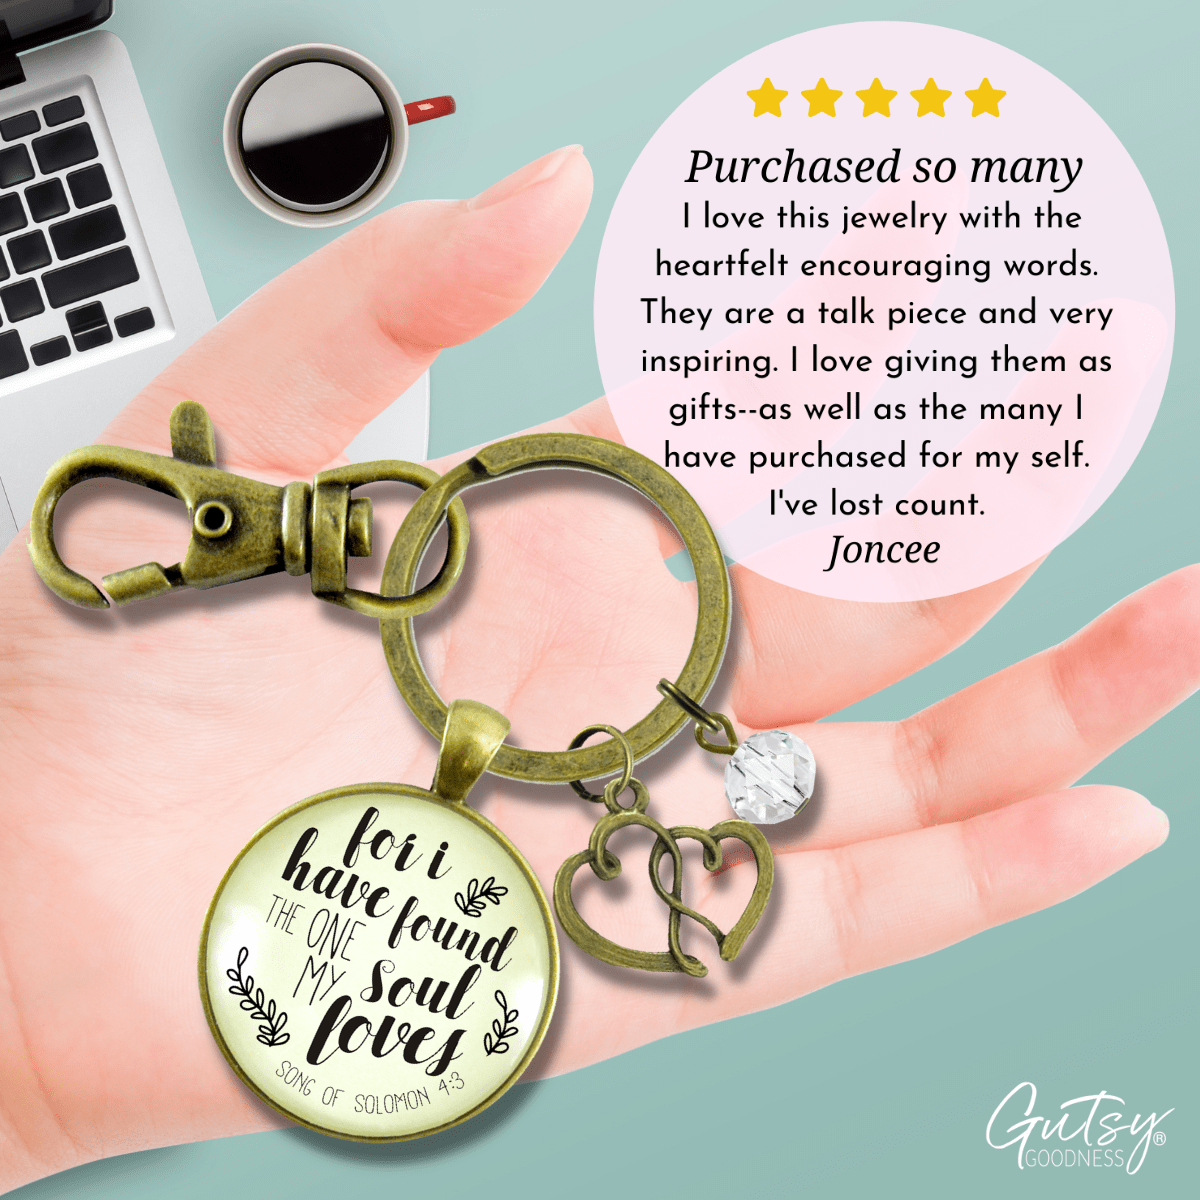 Love My Wife Keychain For I Have Found The One My Soul Loves Romantic Quote Jewelry Gift Heart - Gutsy Goodness